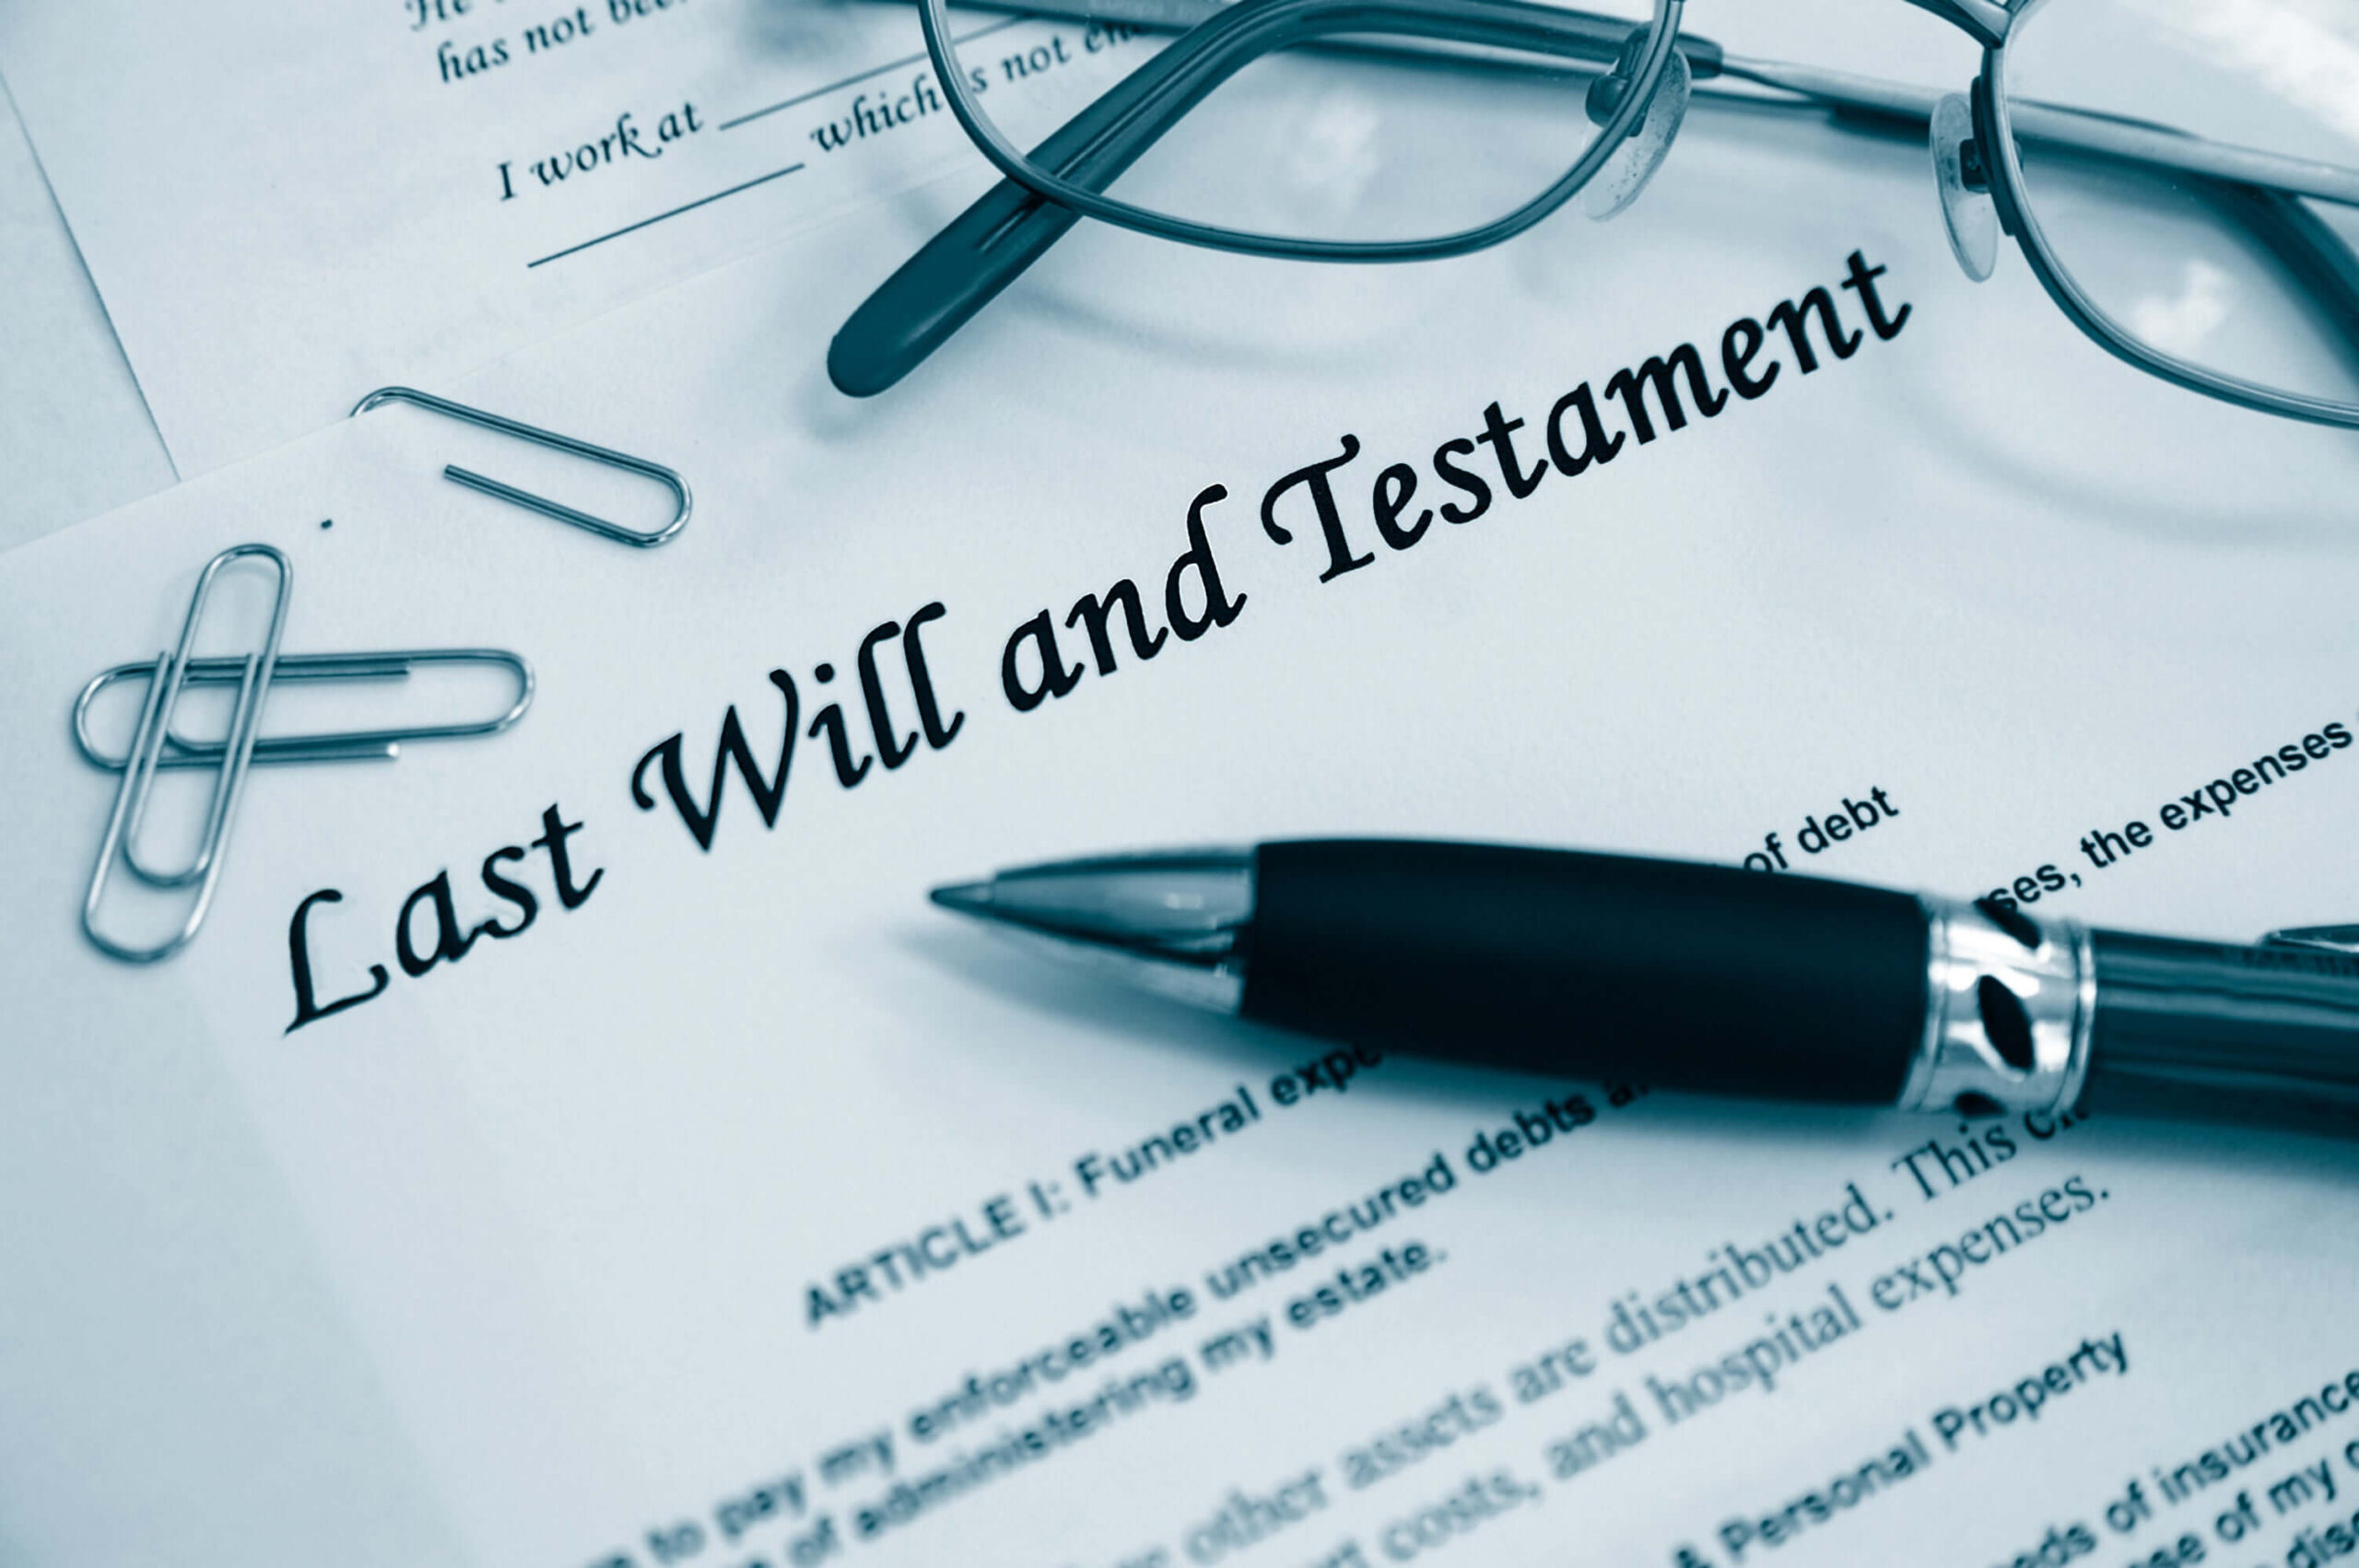 Understand why having a legal will can be advantageous'